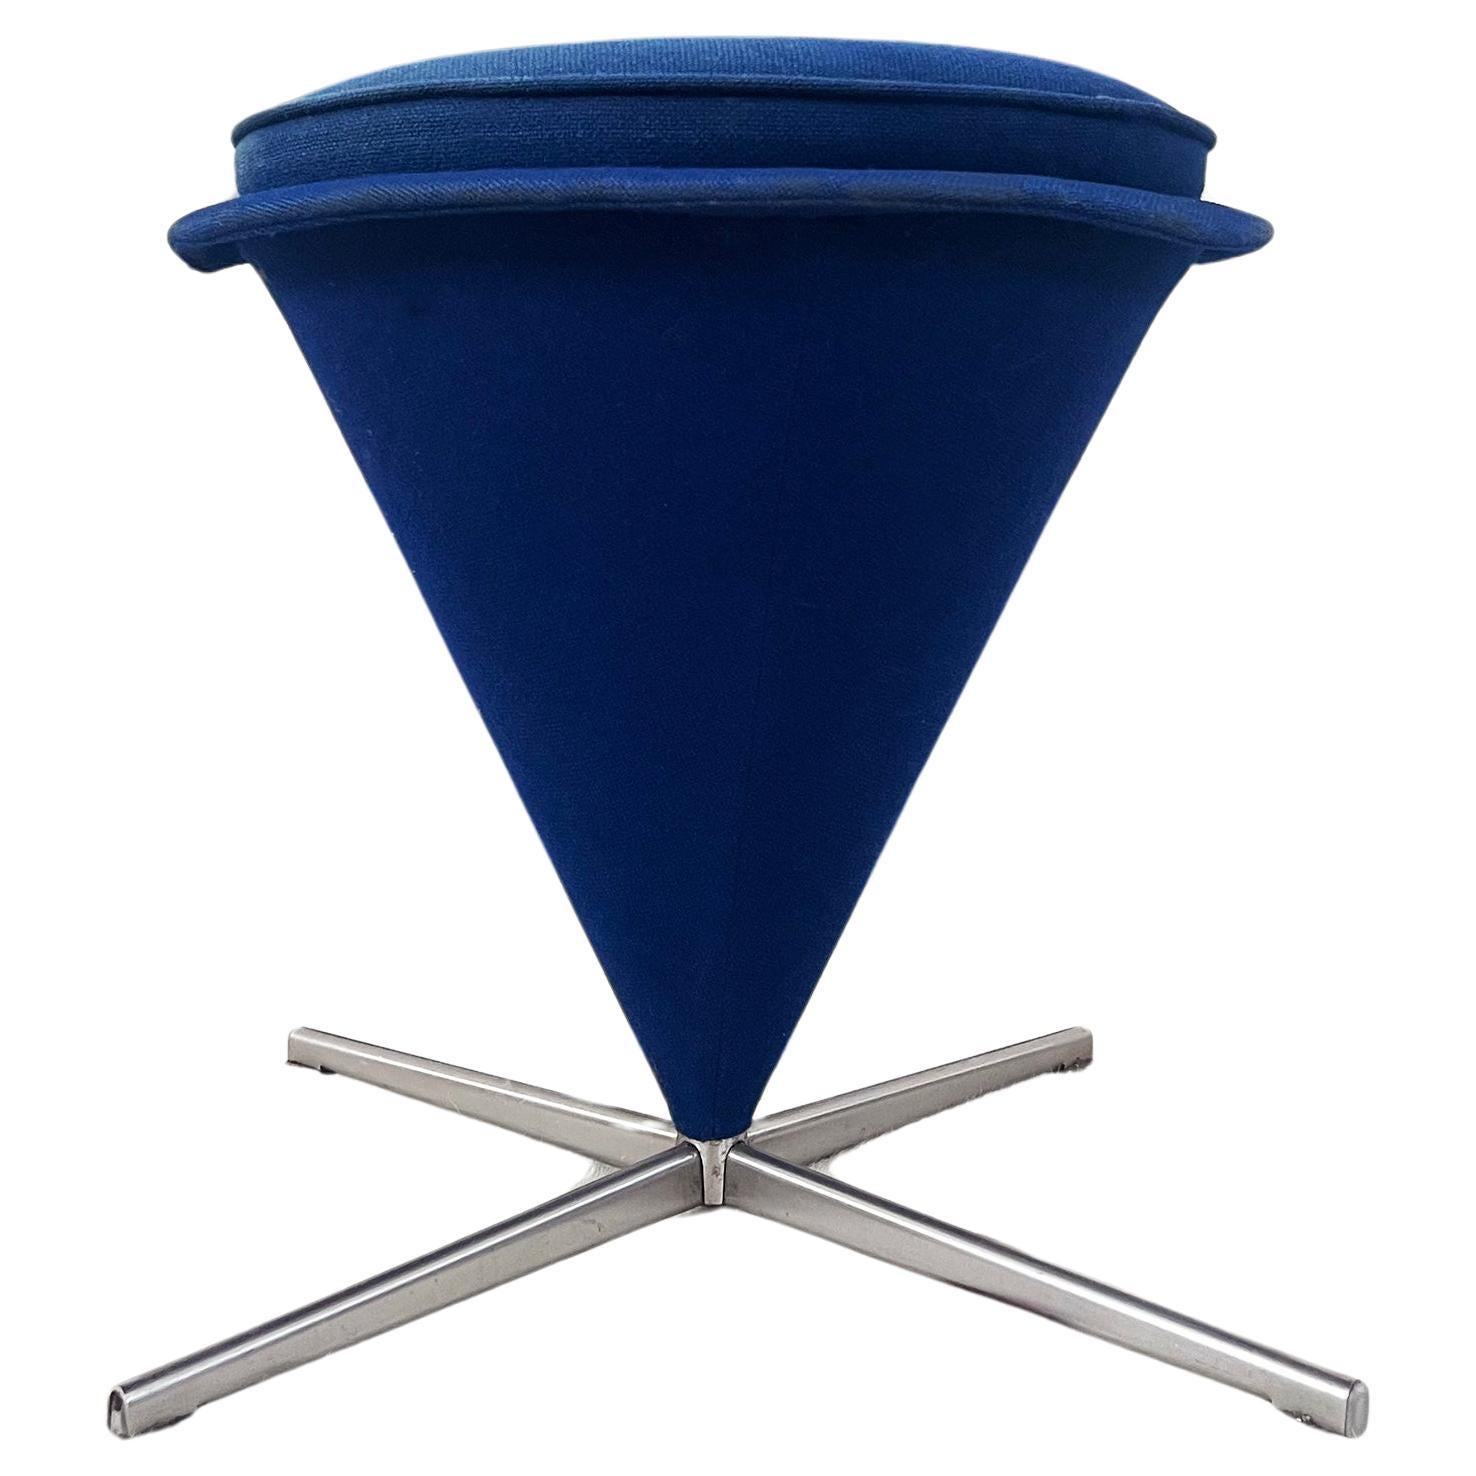 1960s Original Early Verner Panton Cone OTTOMAN Only-- Matches the Cone Chair For Sale